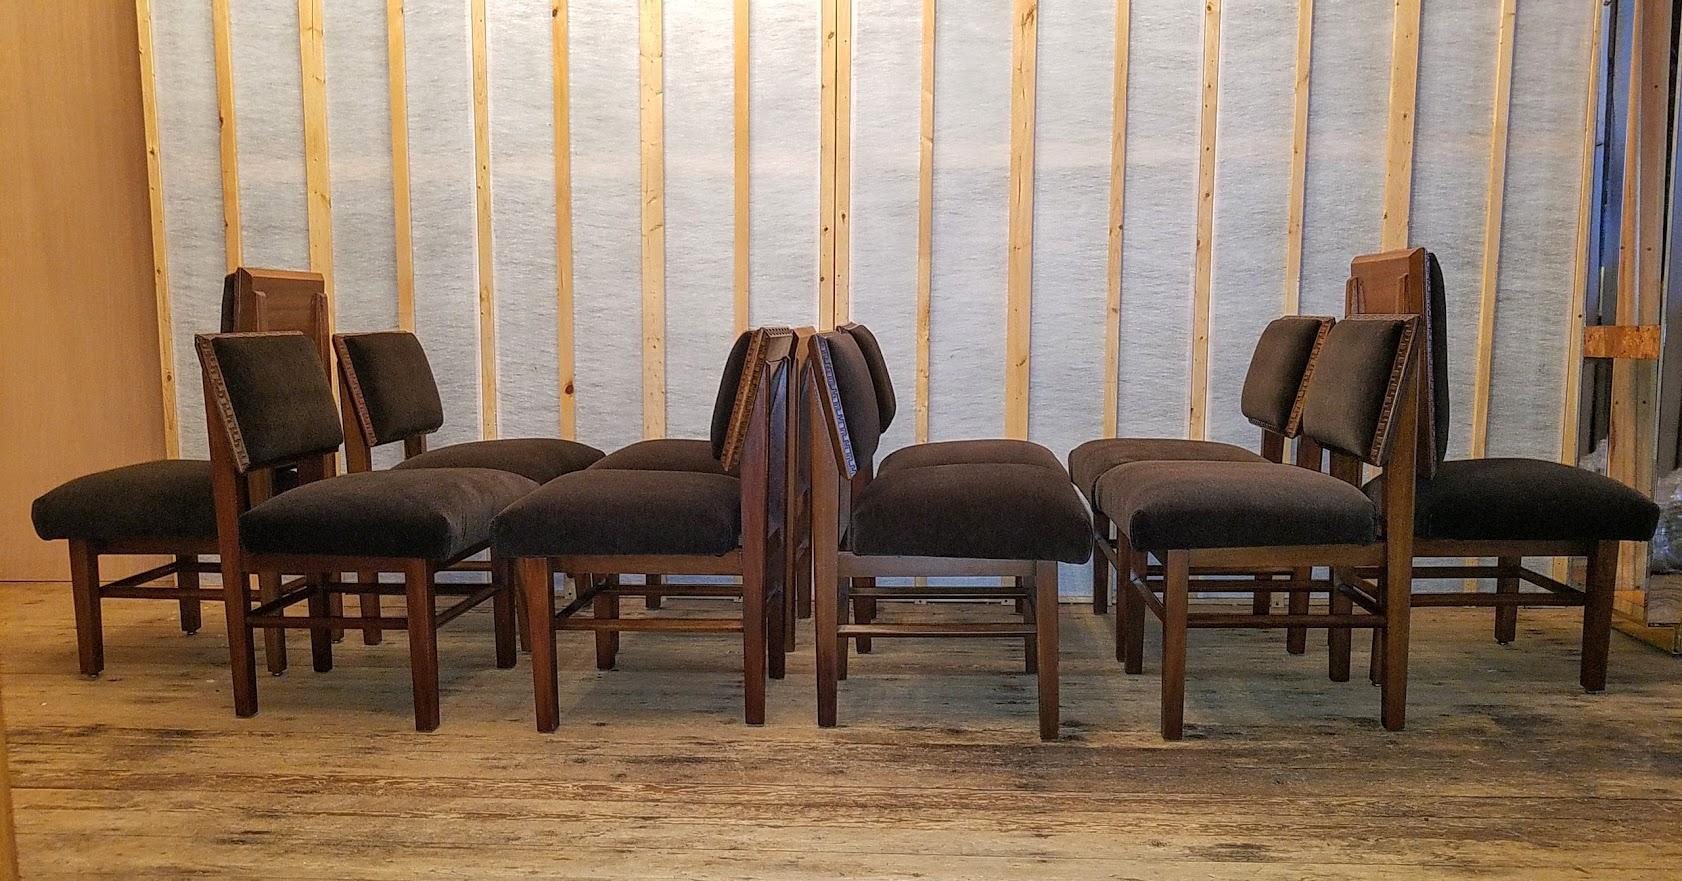 Frank Lloyd Wright suite of ten mahogany Henredon dining chairs dating from the mid-late 1950s.
An assembled group with a pair of high back side chairs surrounded by eight standard side chairs. Four with the Taliesin incised Greek key border on just